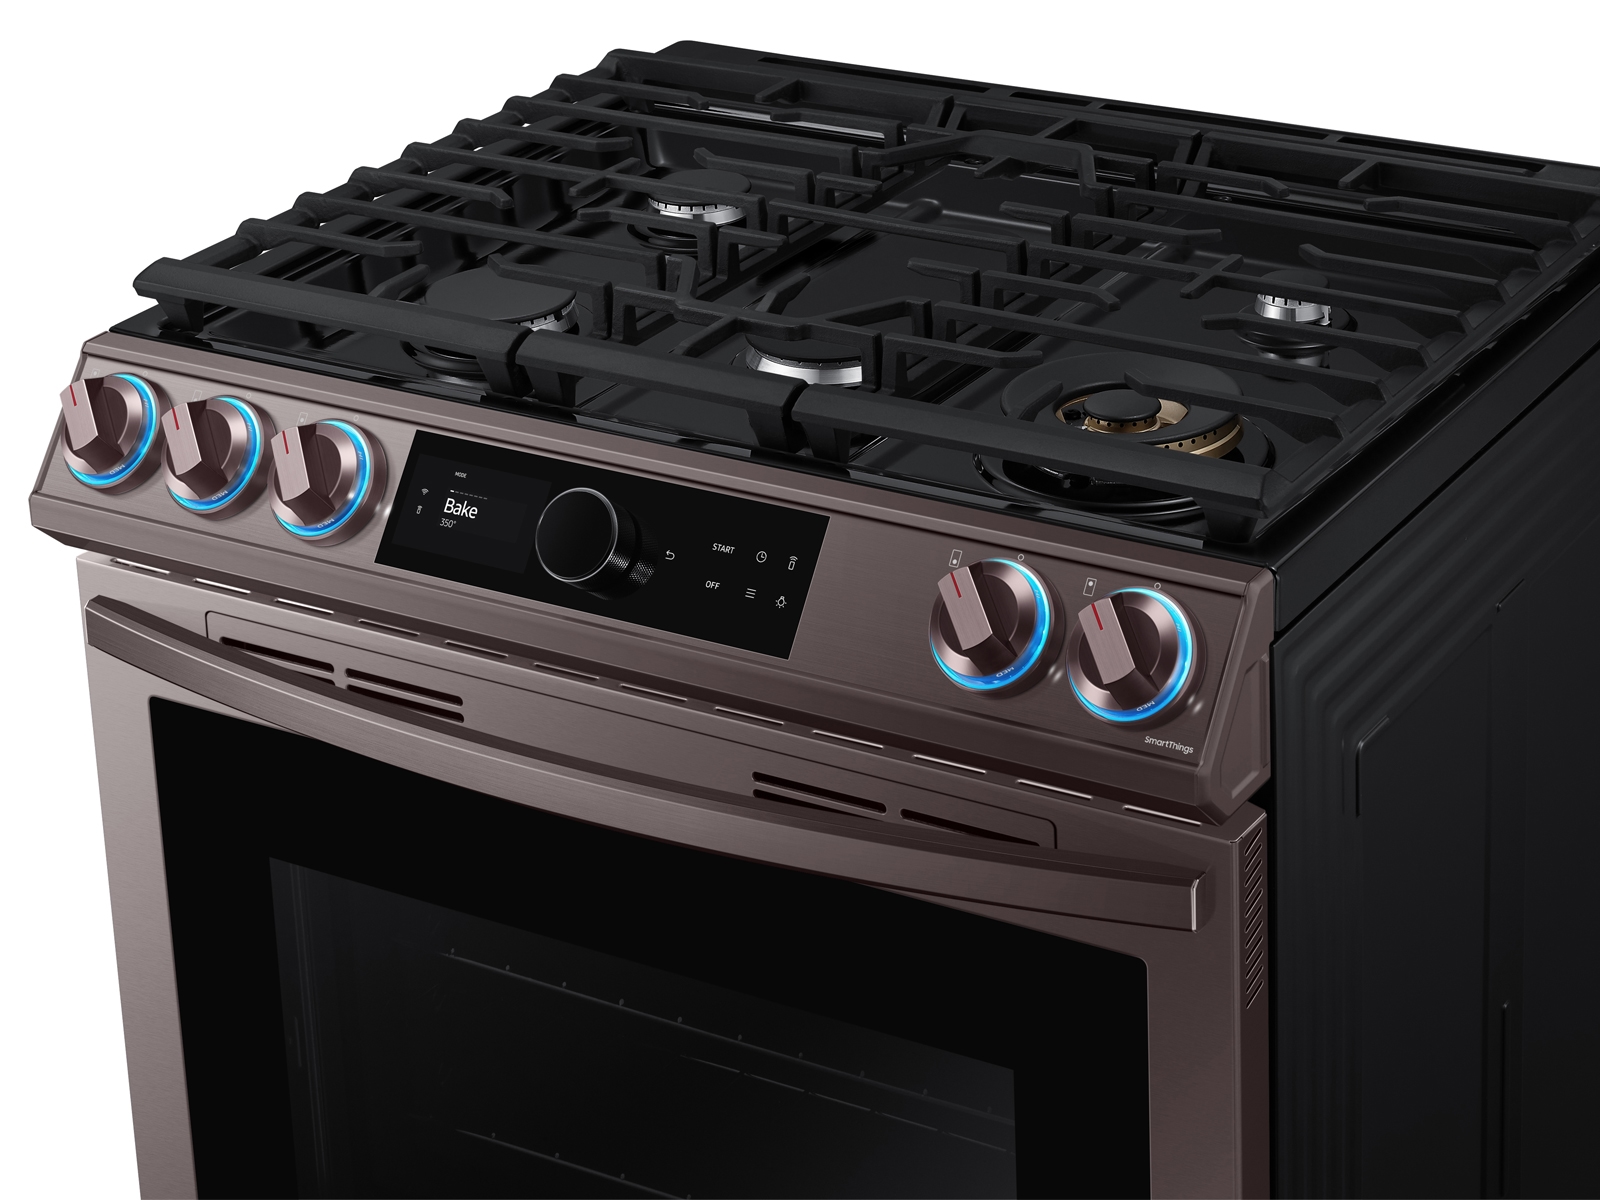 Thumbnail image of Bespoke Smart Slide-in Gas Range 6.0 cu. ft. with Smart Dial, Air Fry & Wi-Fi in Tuscan Steel